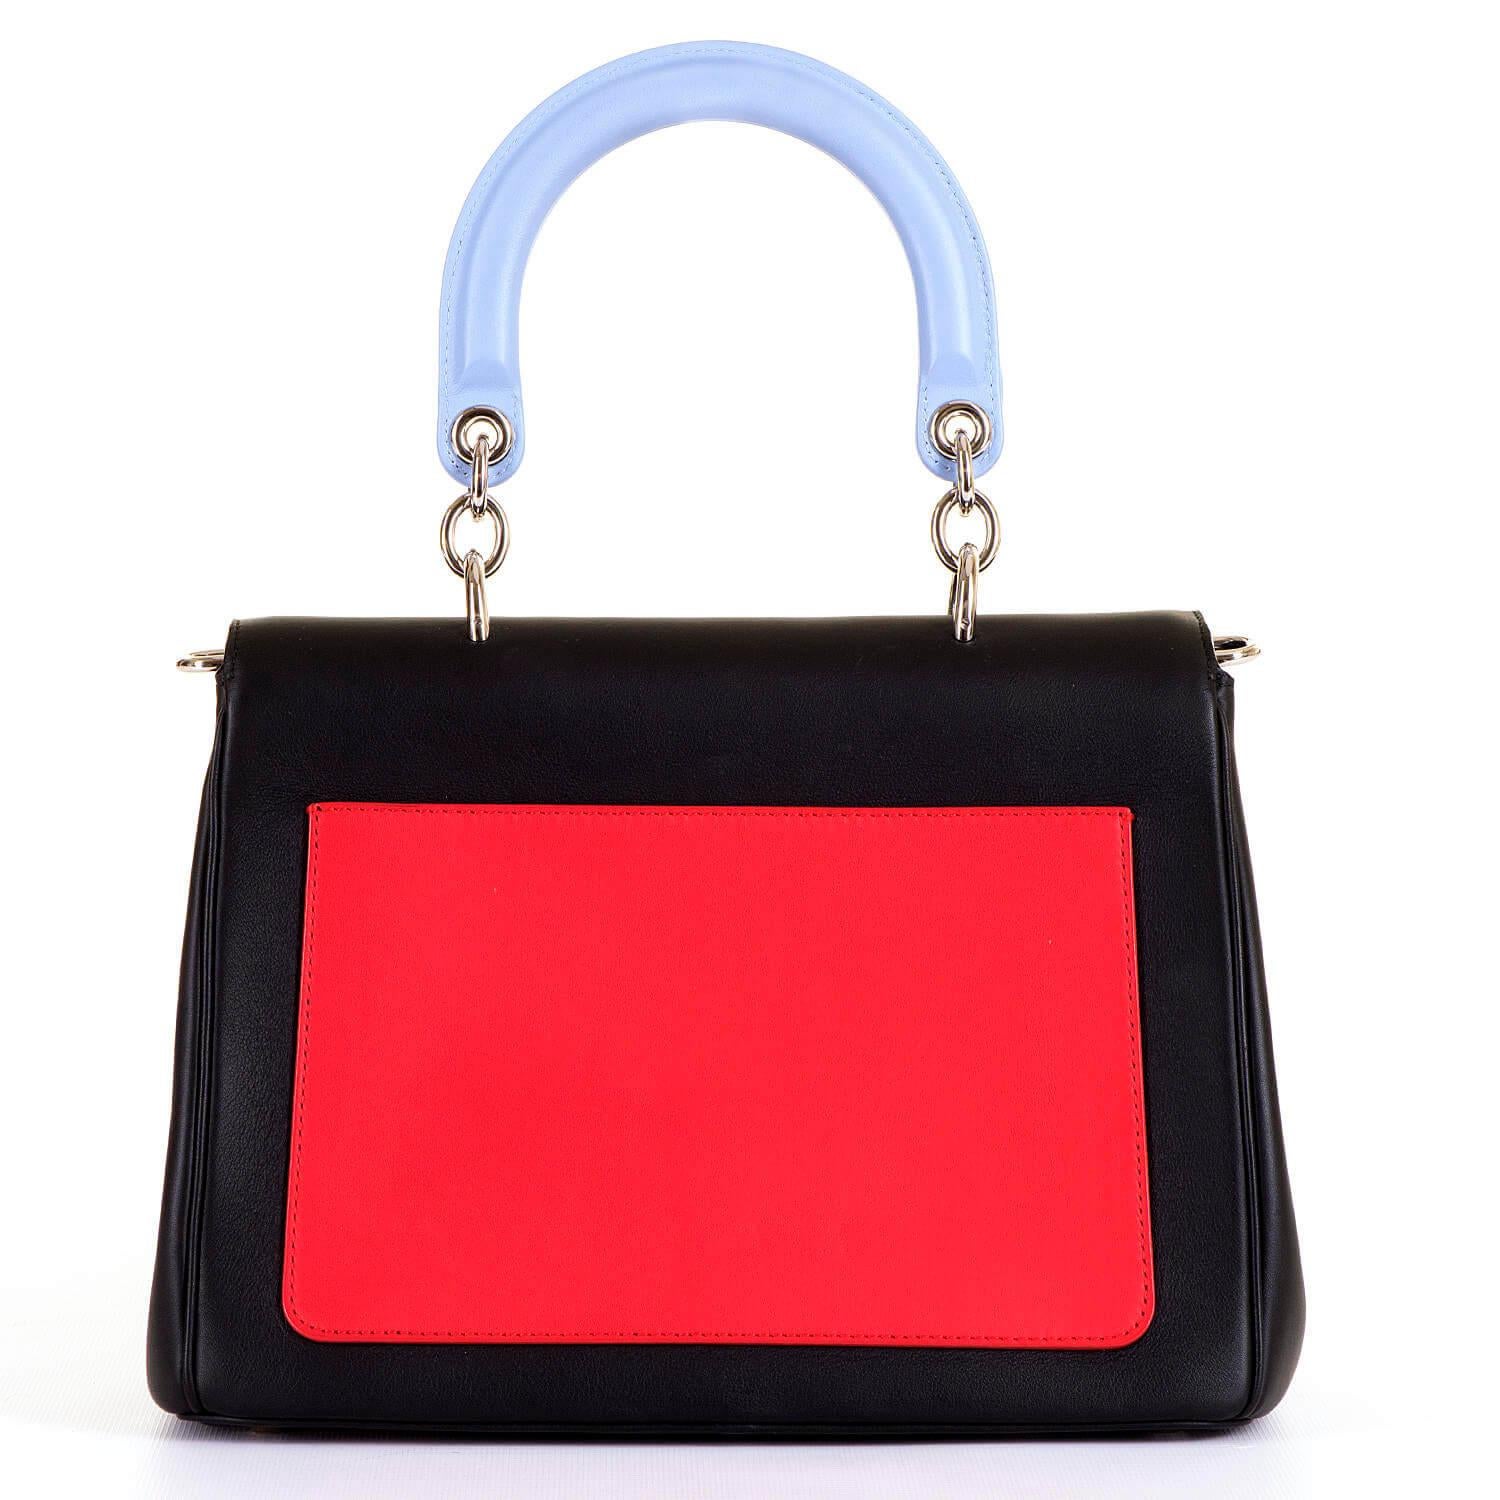 A simply stunning Rare, Limited Edition, Dior 'Be Dior' tricolour Handbag & Shoulder Bag. In pristine 'Store-Fresh' condition the bag is finished in Matt Black, Poster Red & Wedgwood Blue, enhanced with Silver Palladium Hardware. The double-flap bag